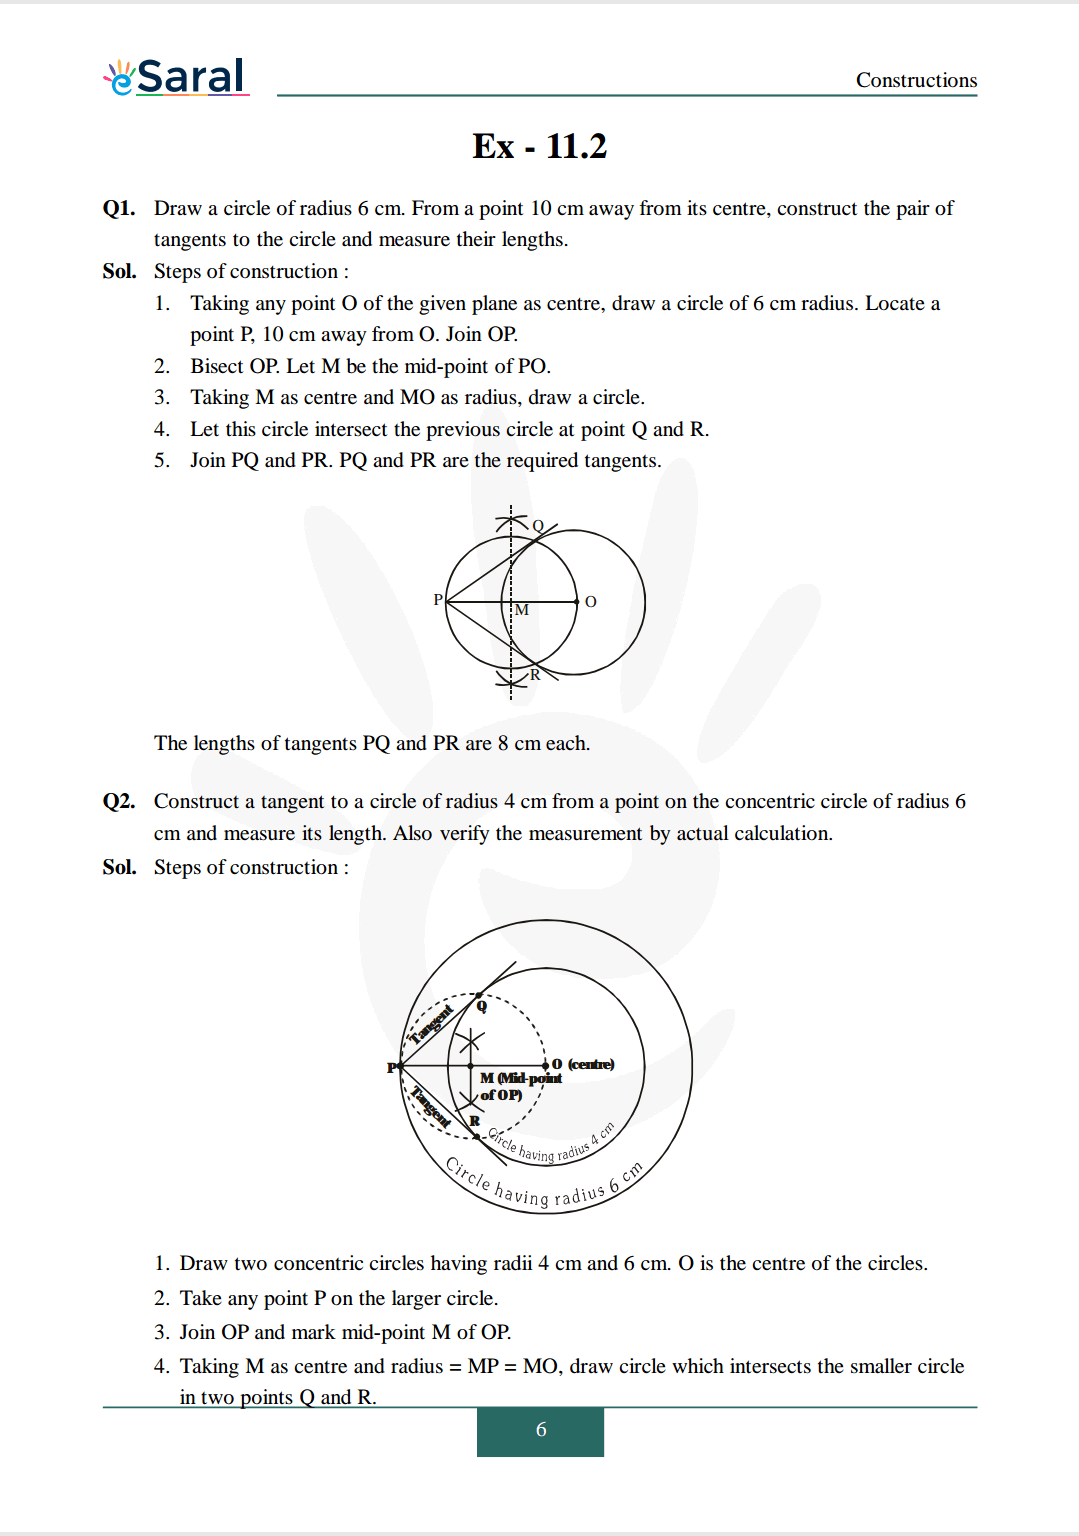 NCERT Solutions for Class 10 Maths chapter 11 Exercise 11.2 Image 1